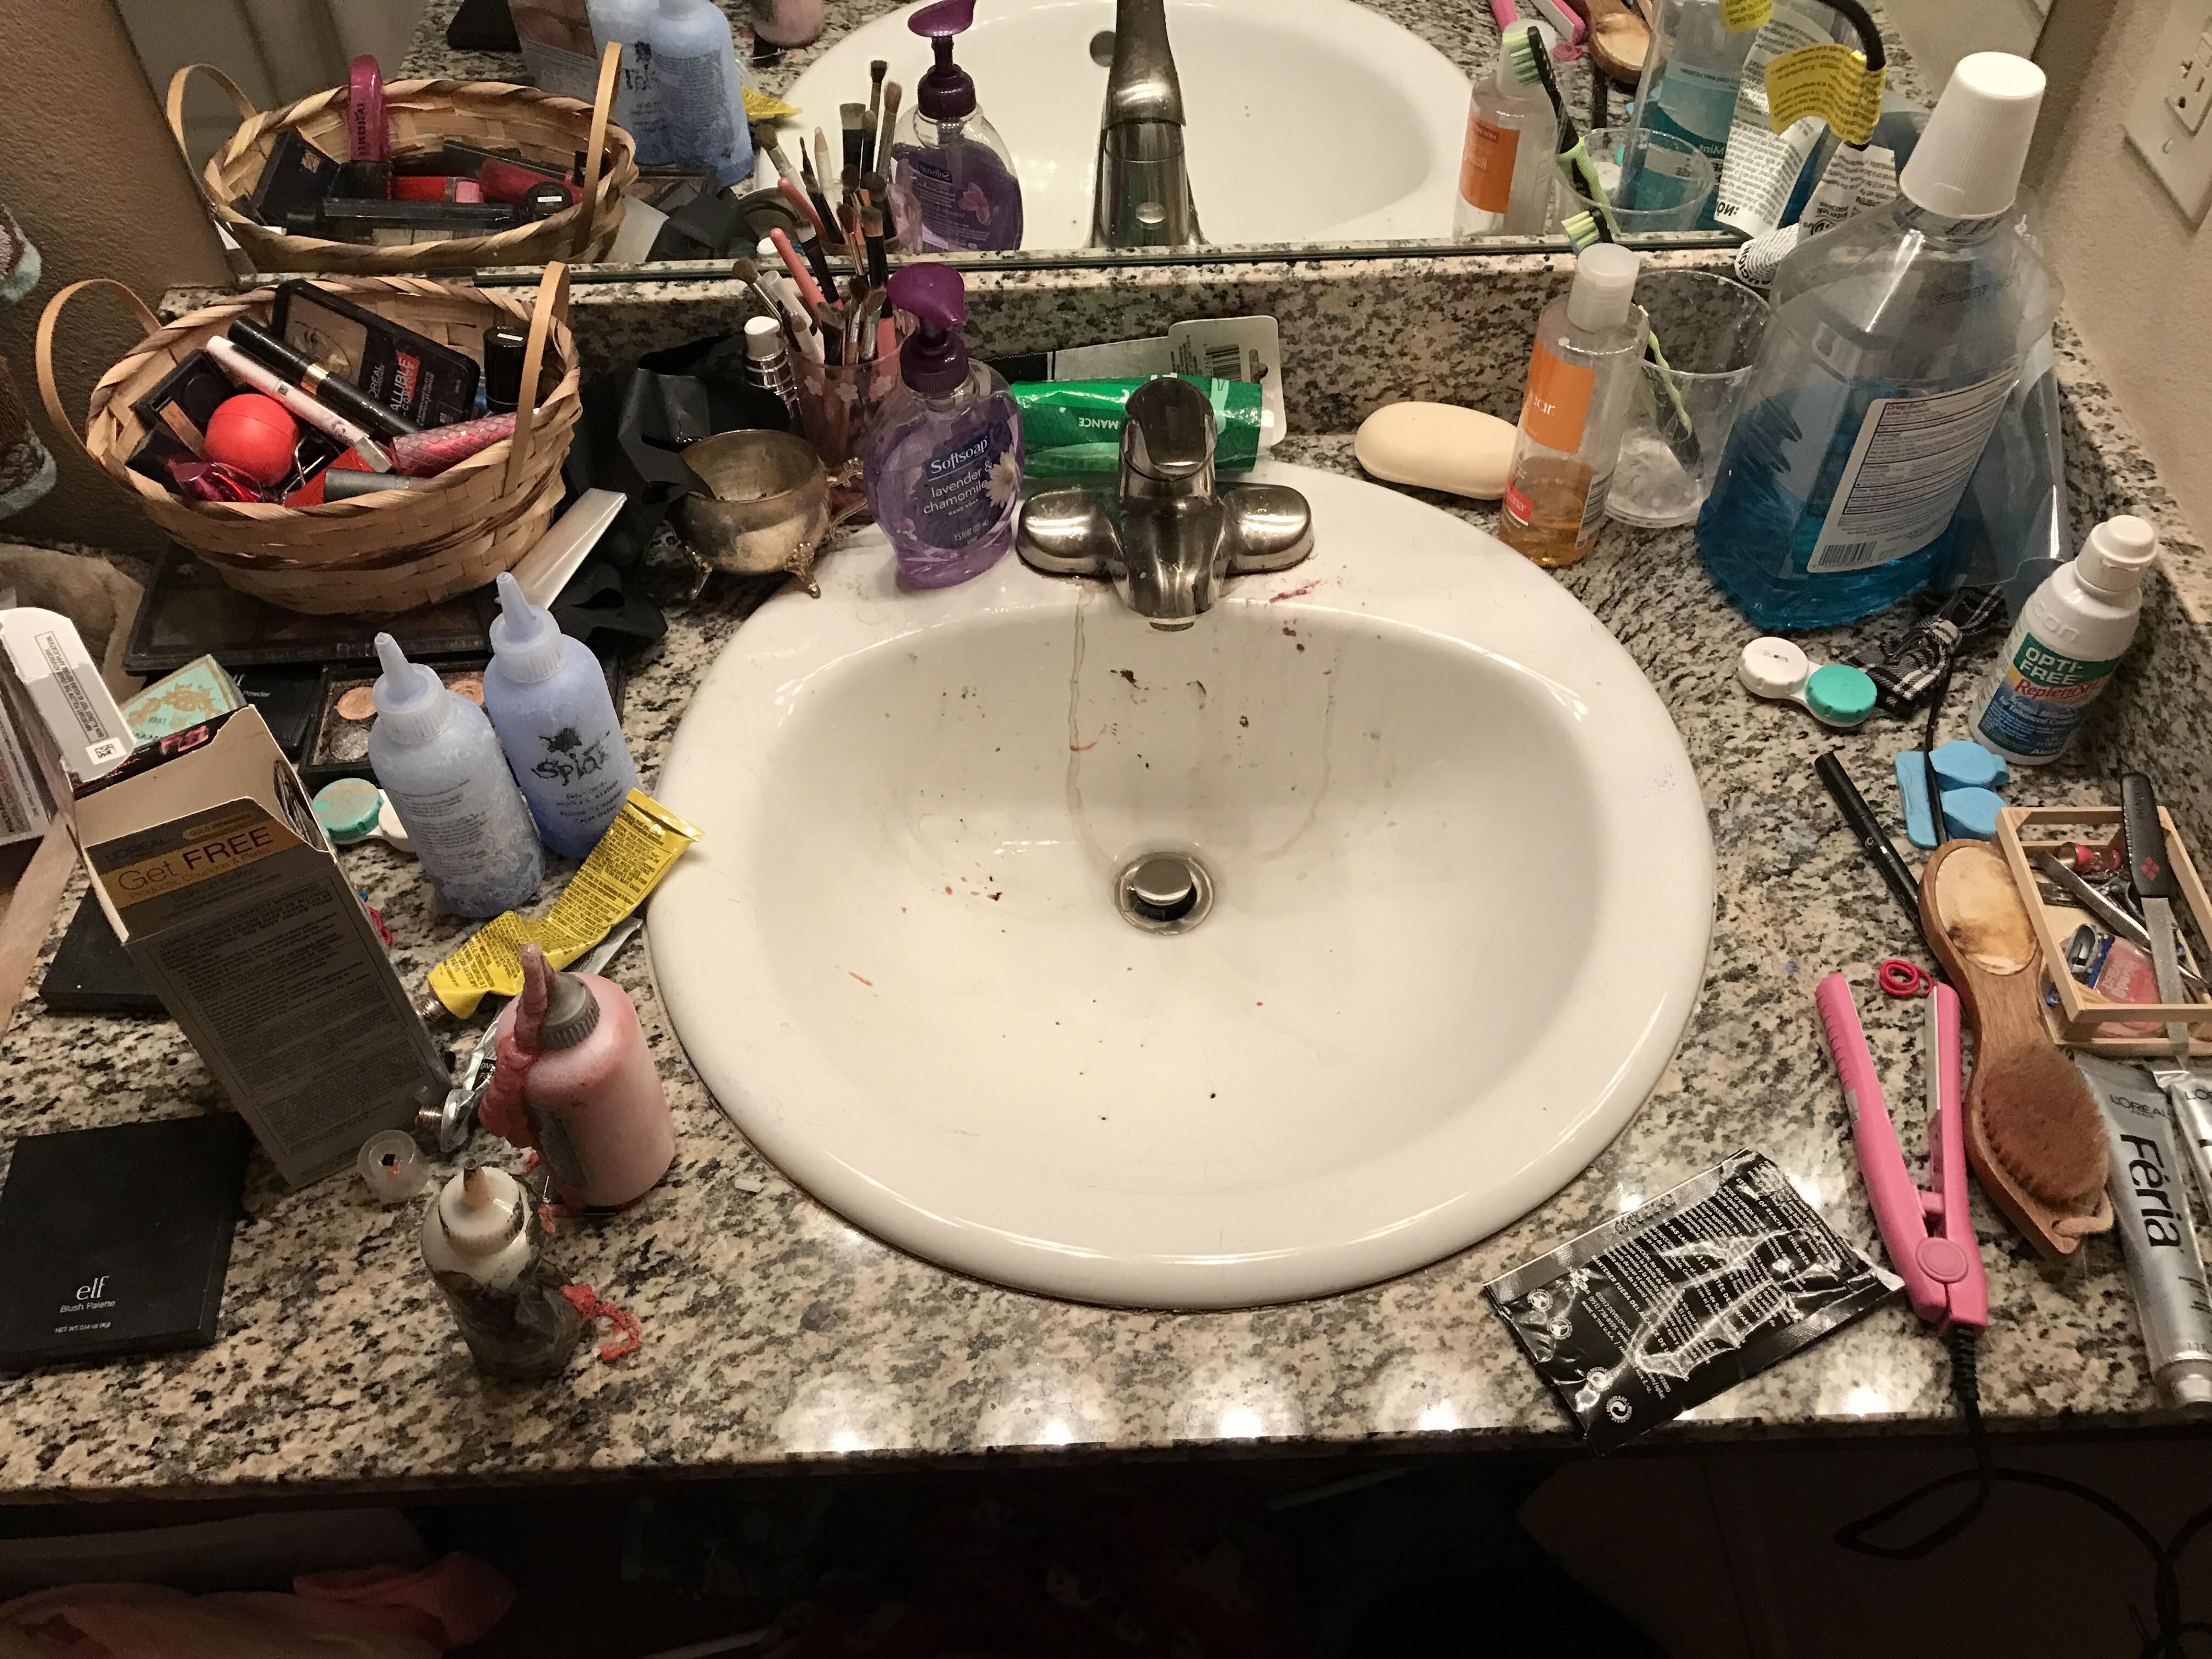 GF: "Your beard shavings are making the sink look dirty."